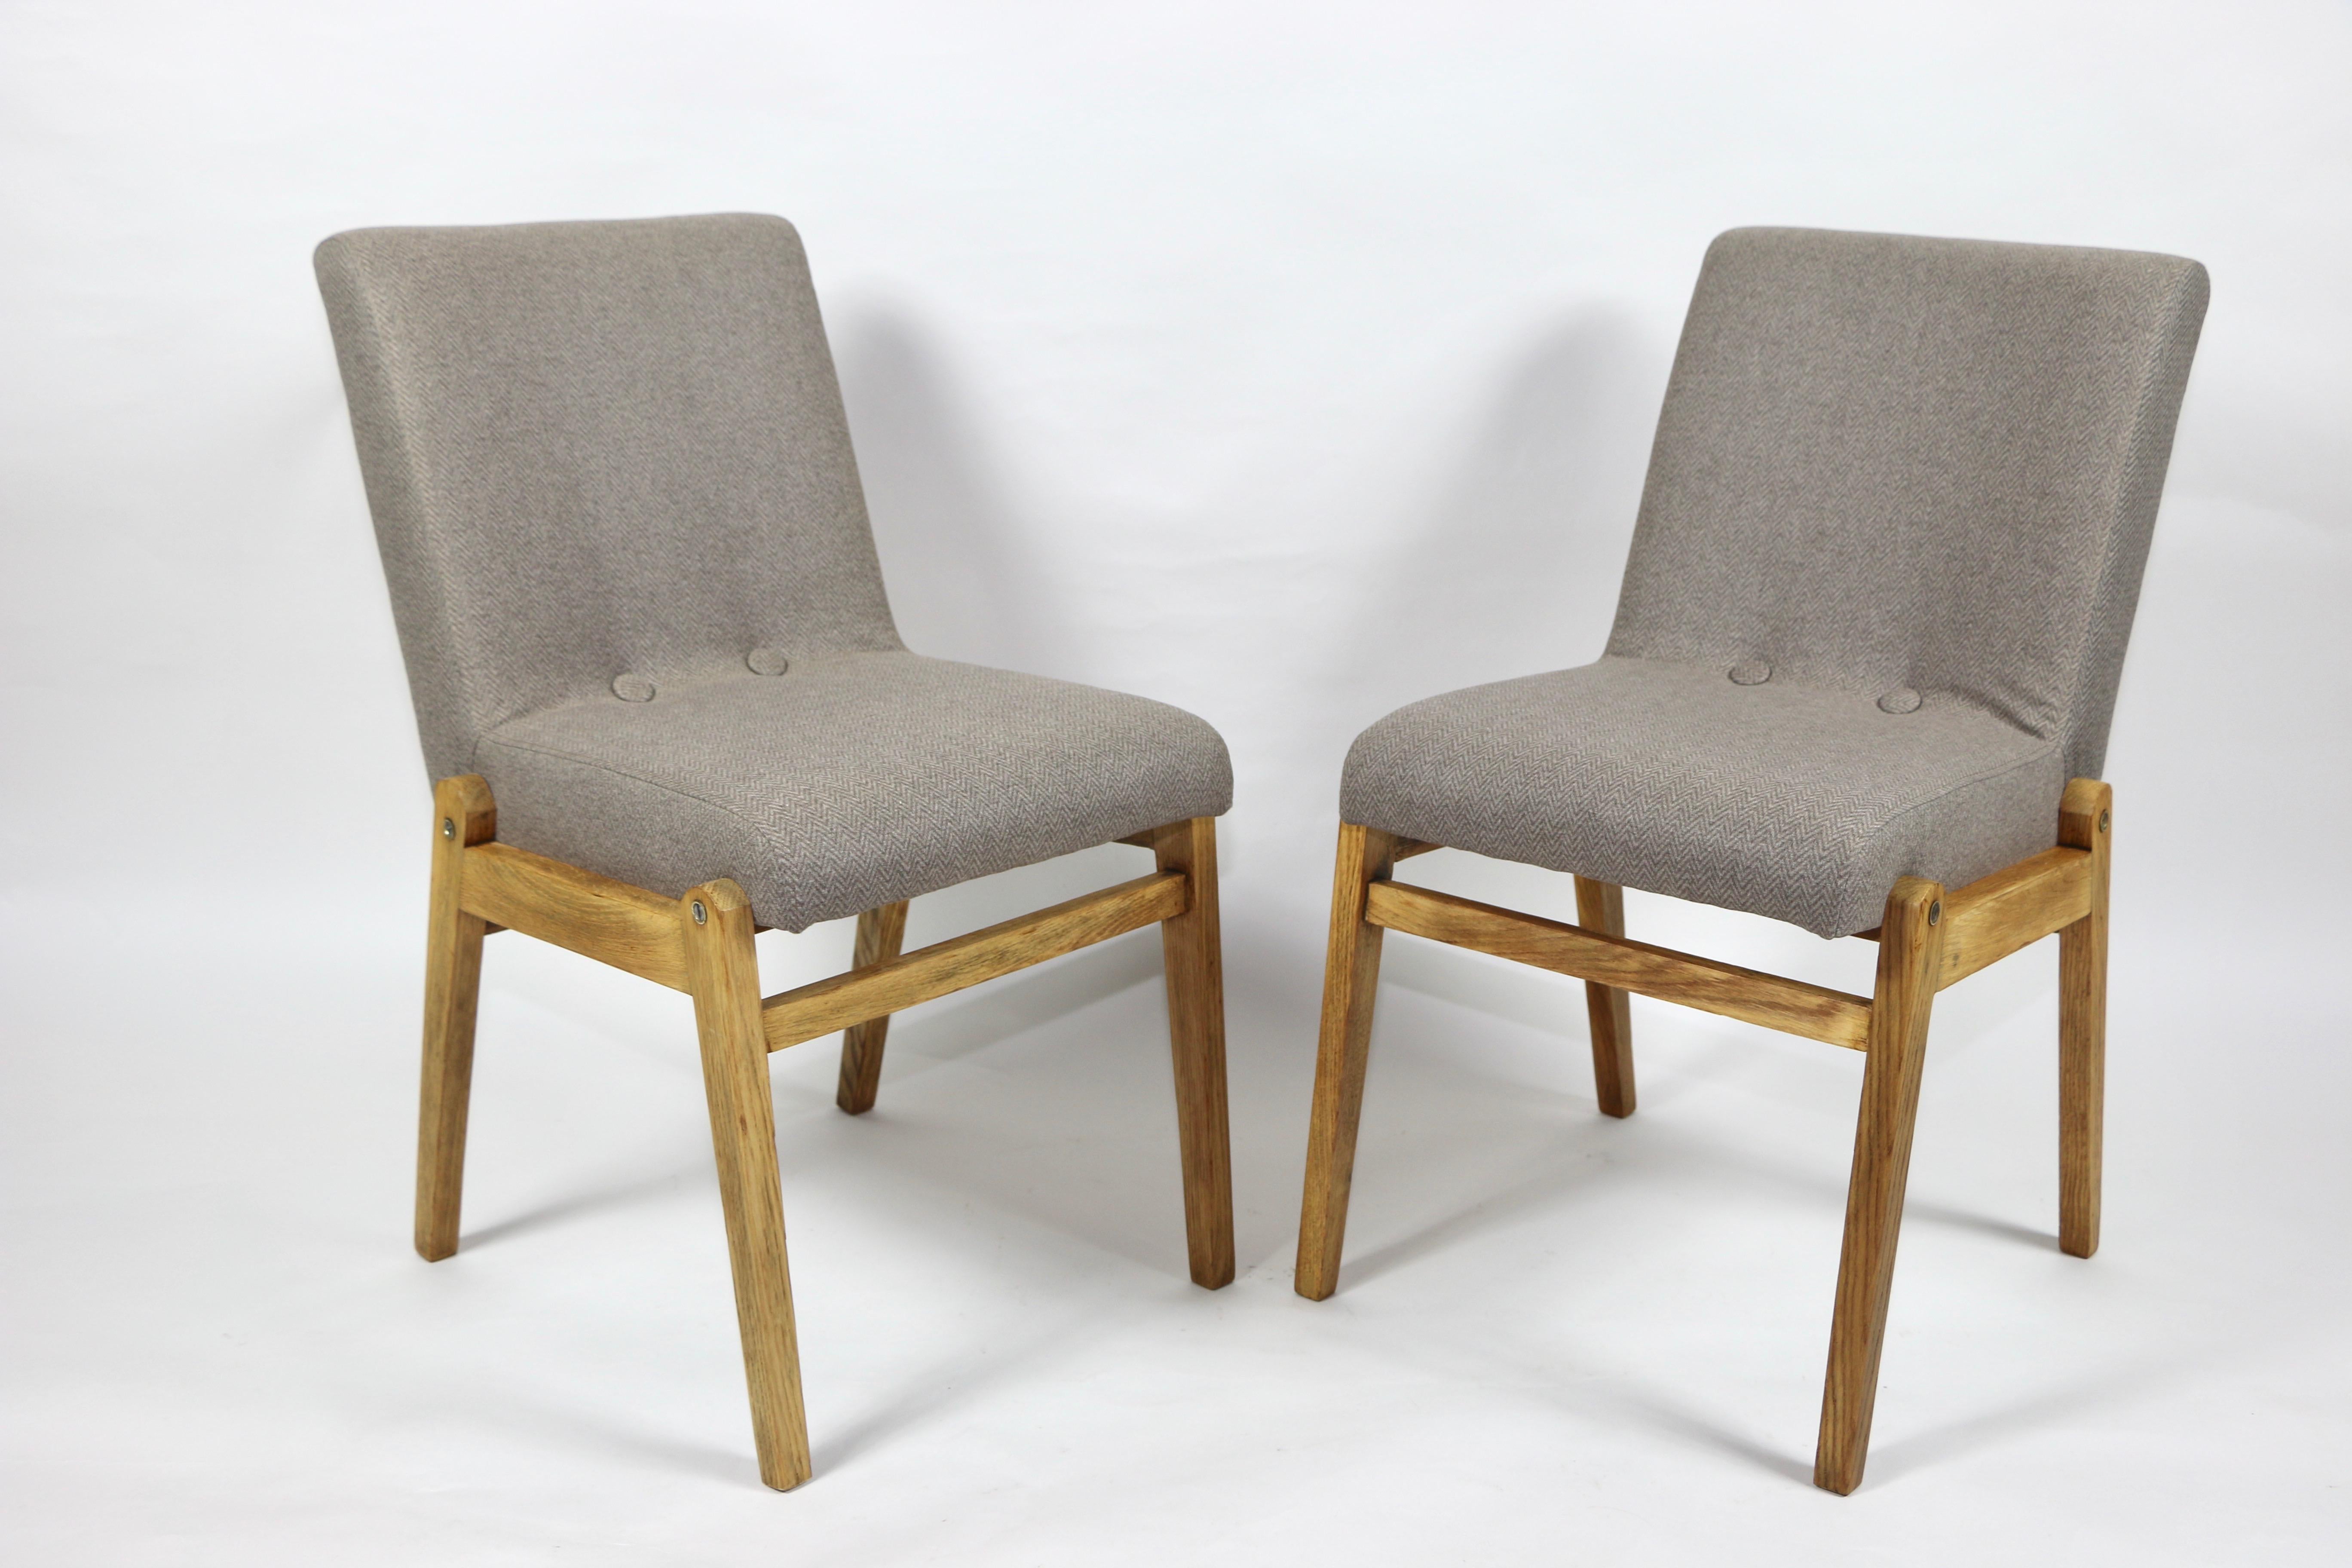 Two polish Aga chairs in Braun from 1970s, new upholstery covered with fabric in fashionable Braun herringbone, finished with wooden chair cushion. Wooden elements in natural oak color. Perfect condition.


Dimension H 75 x W 43 x D 54.